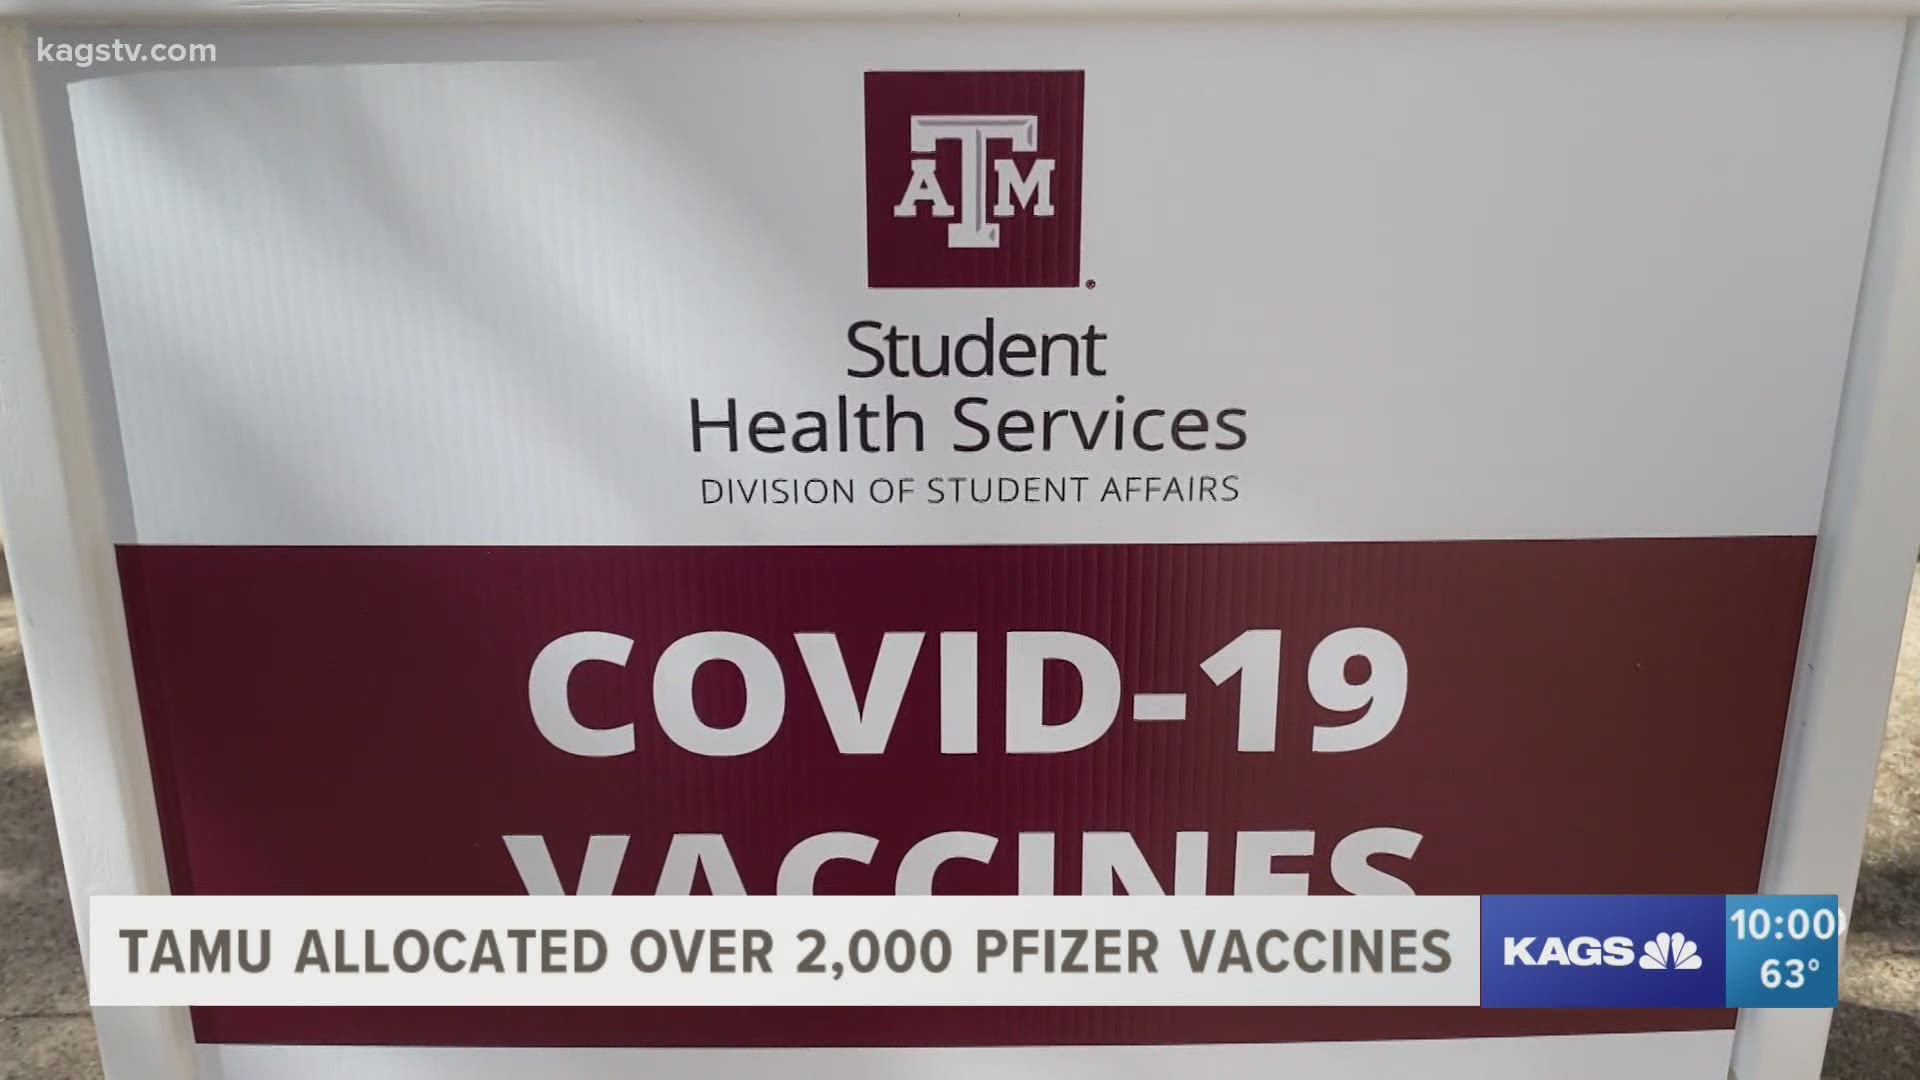 TAMU Student Health Services will vaccinate as many students, faculty and staff on campus as possible.